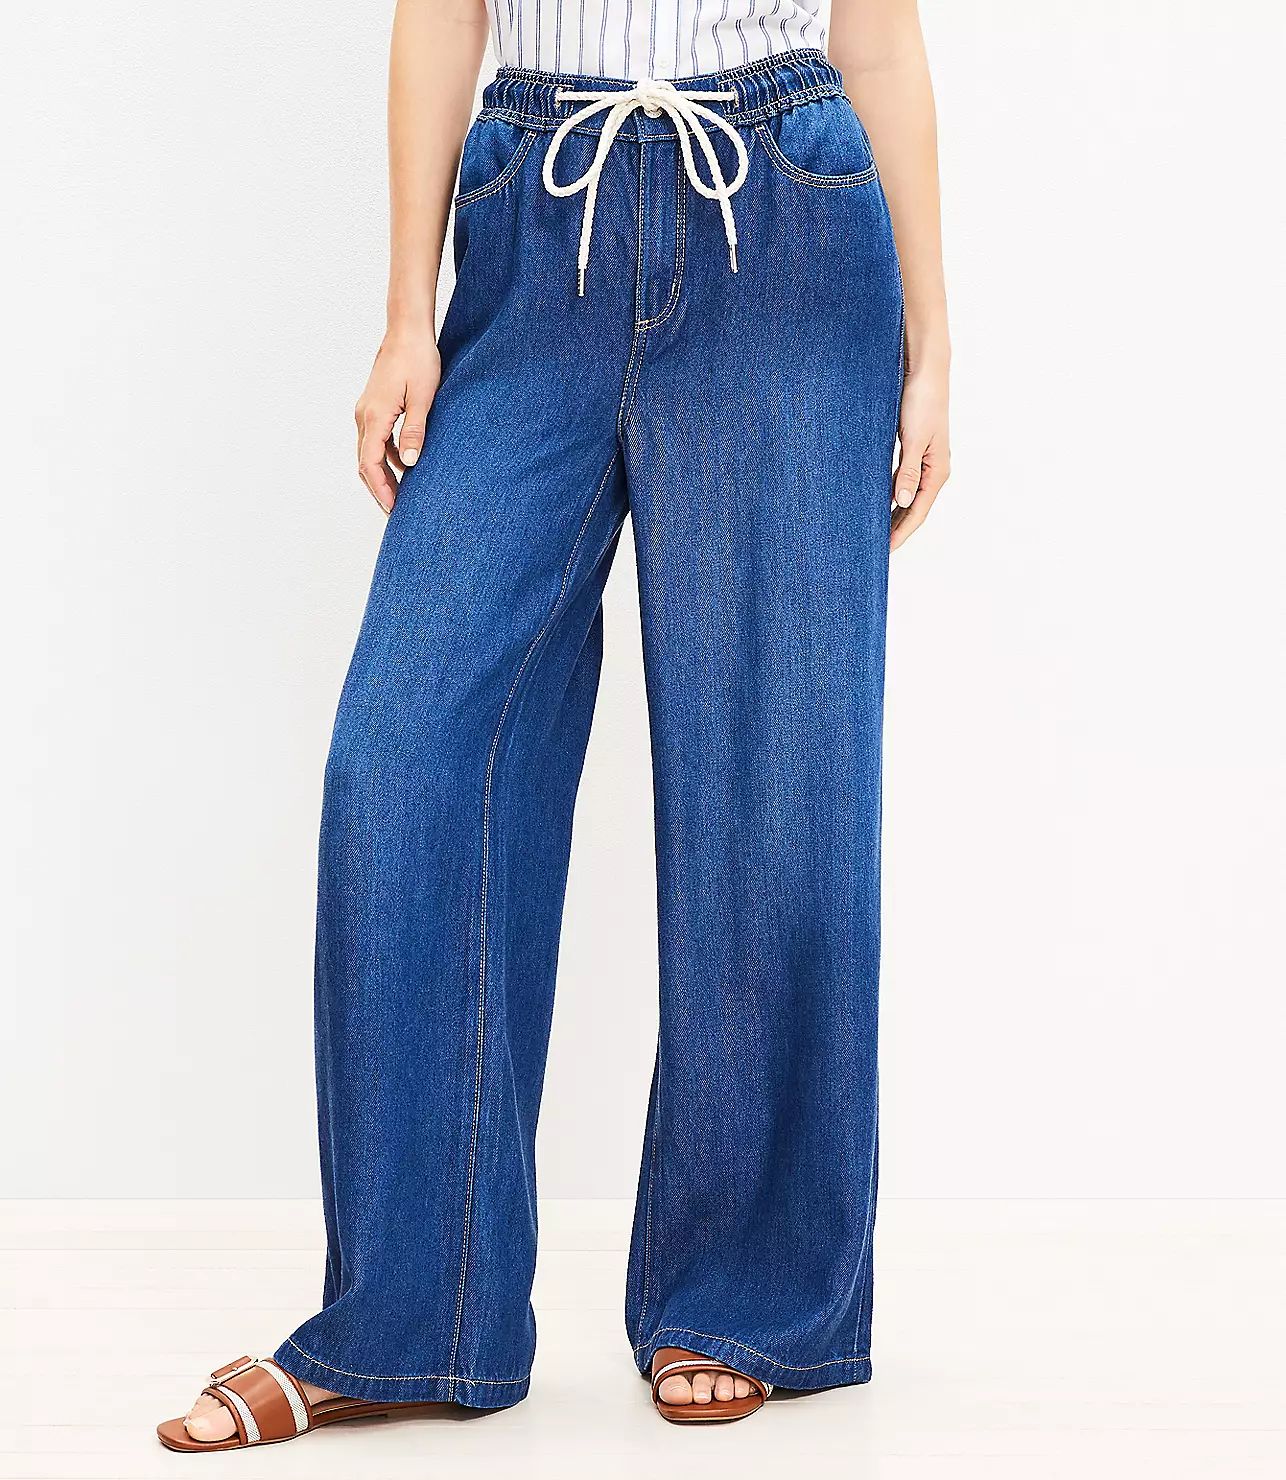 Pull On High Rise Palazzo Jeans in Dark Wash | LOFT